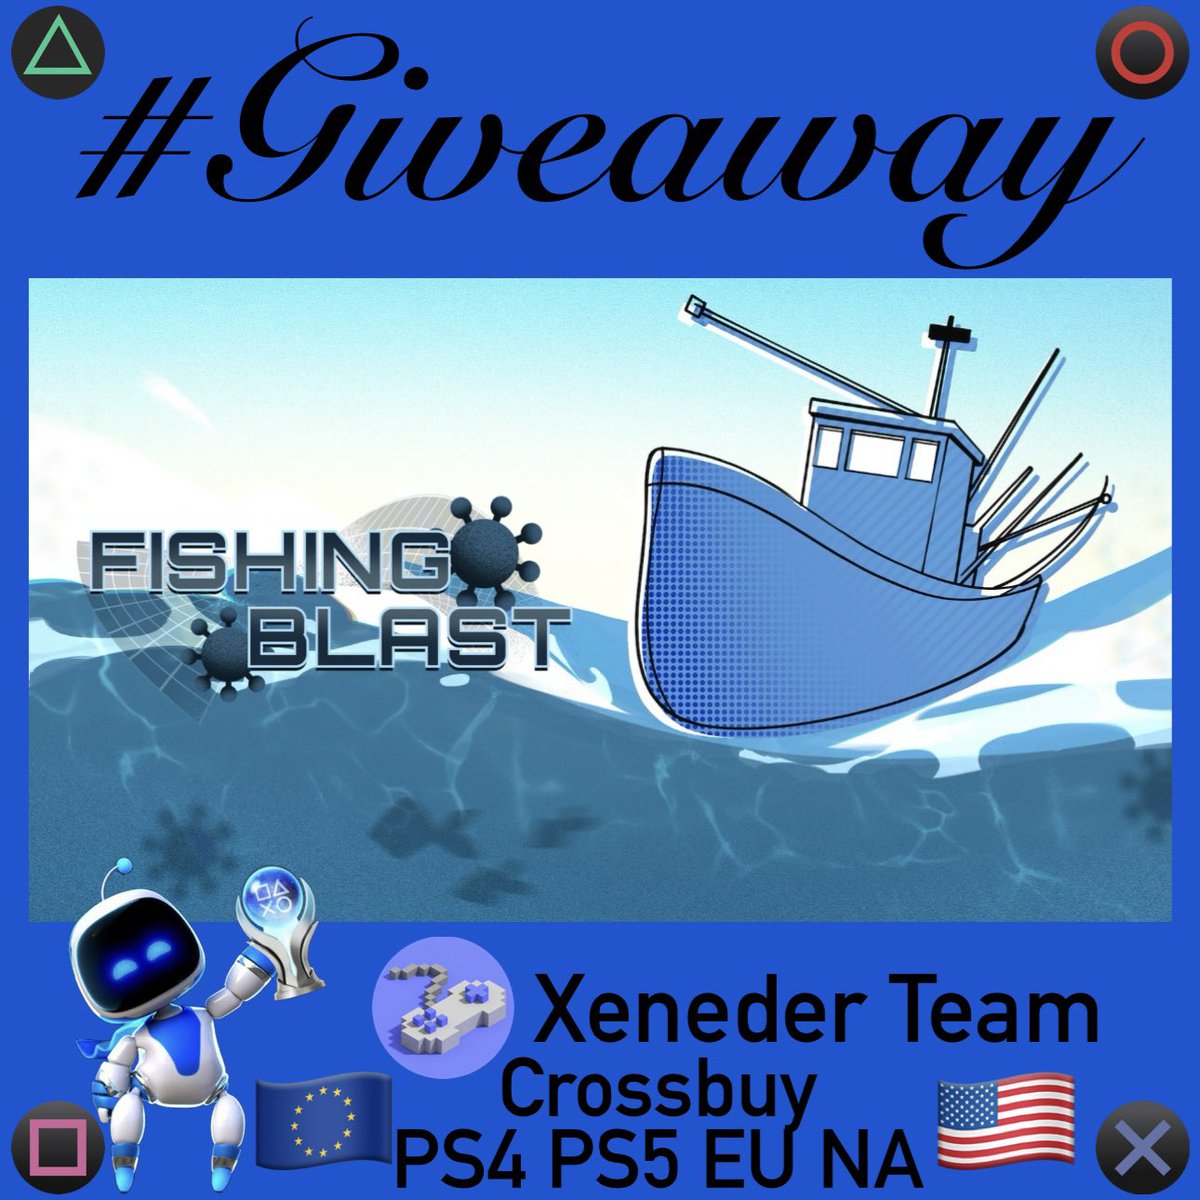 #Release #Giveaway FISHING BLAST 🐟🎣 I have 2 codes (Crossbuy #PS4 #PS5) 1x EU 🇪🇺 1x NA 🇺🇸 If you want a specific one, please comment To win: ☑️ Repost 🔄 ☑️ Follow 👤@PSN_Robert2567 👤 @xeneder_team Winners announced in 48 hours 🍀 Good Luck to all #GiveawayAlert